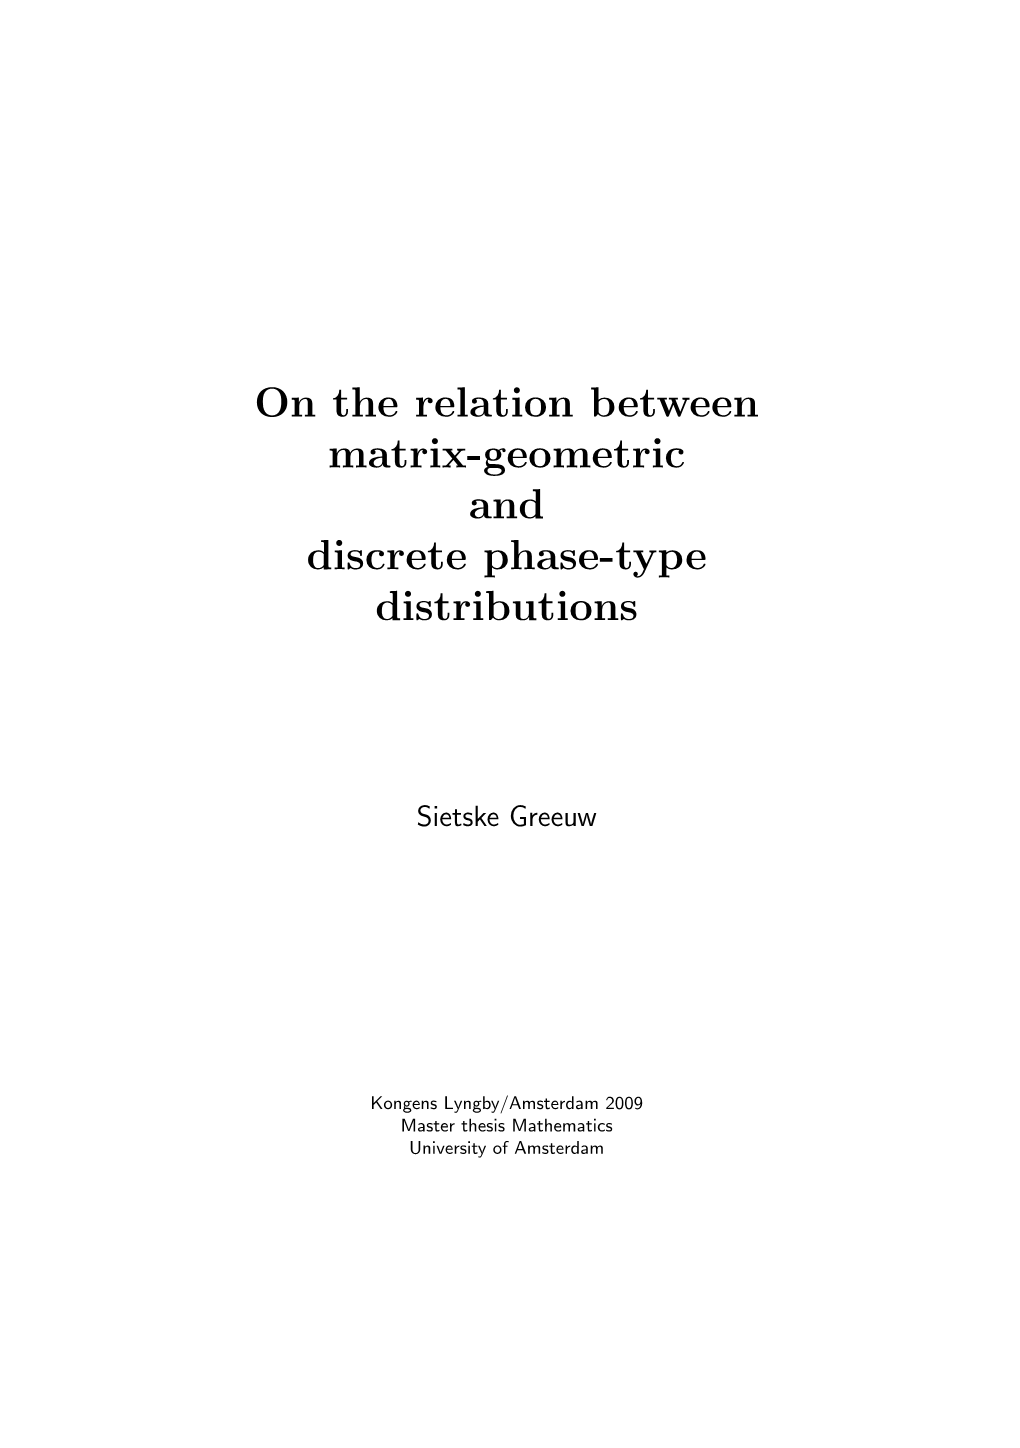 On the Relation Between Matrix-Geometric and Discrete Phase-Type Distributions